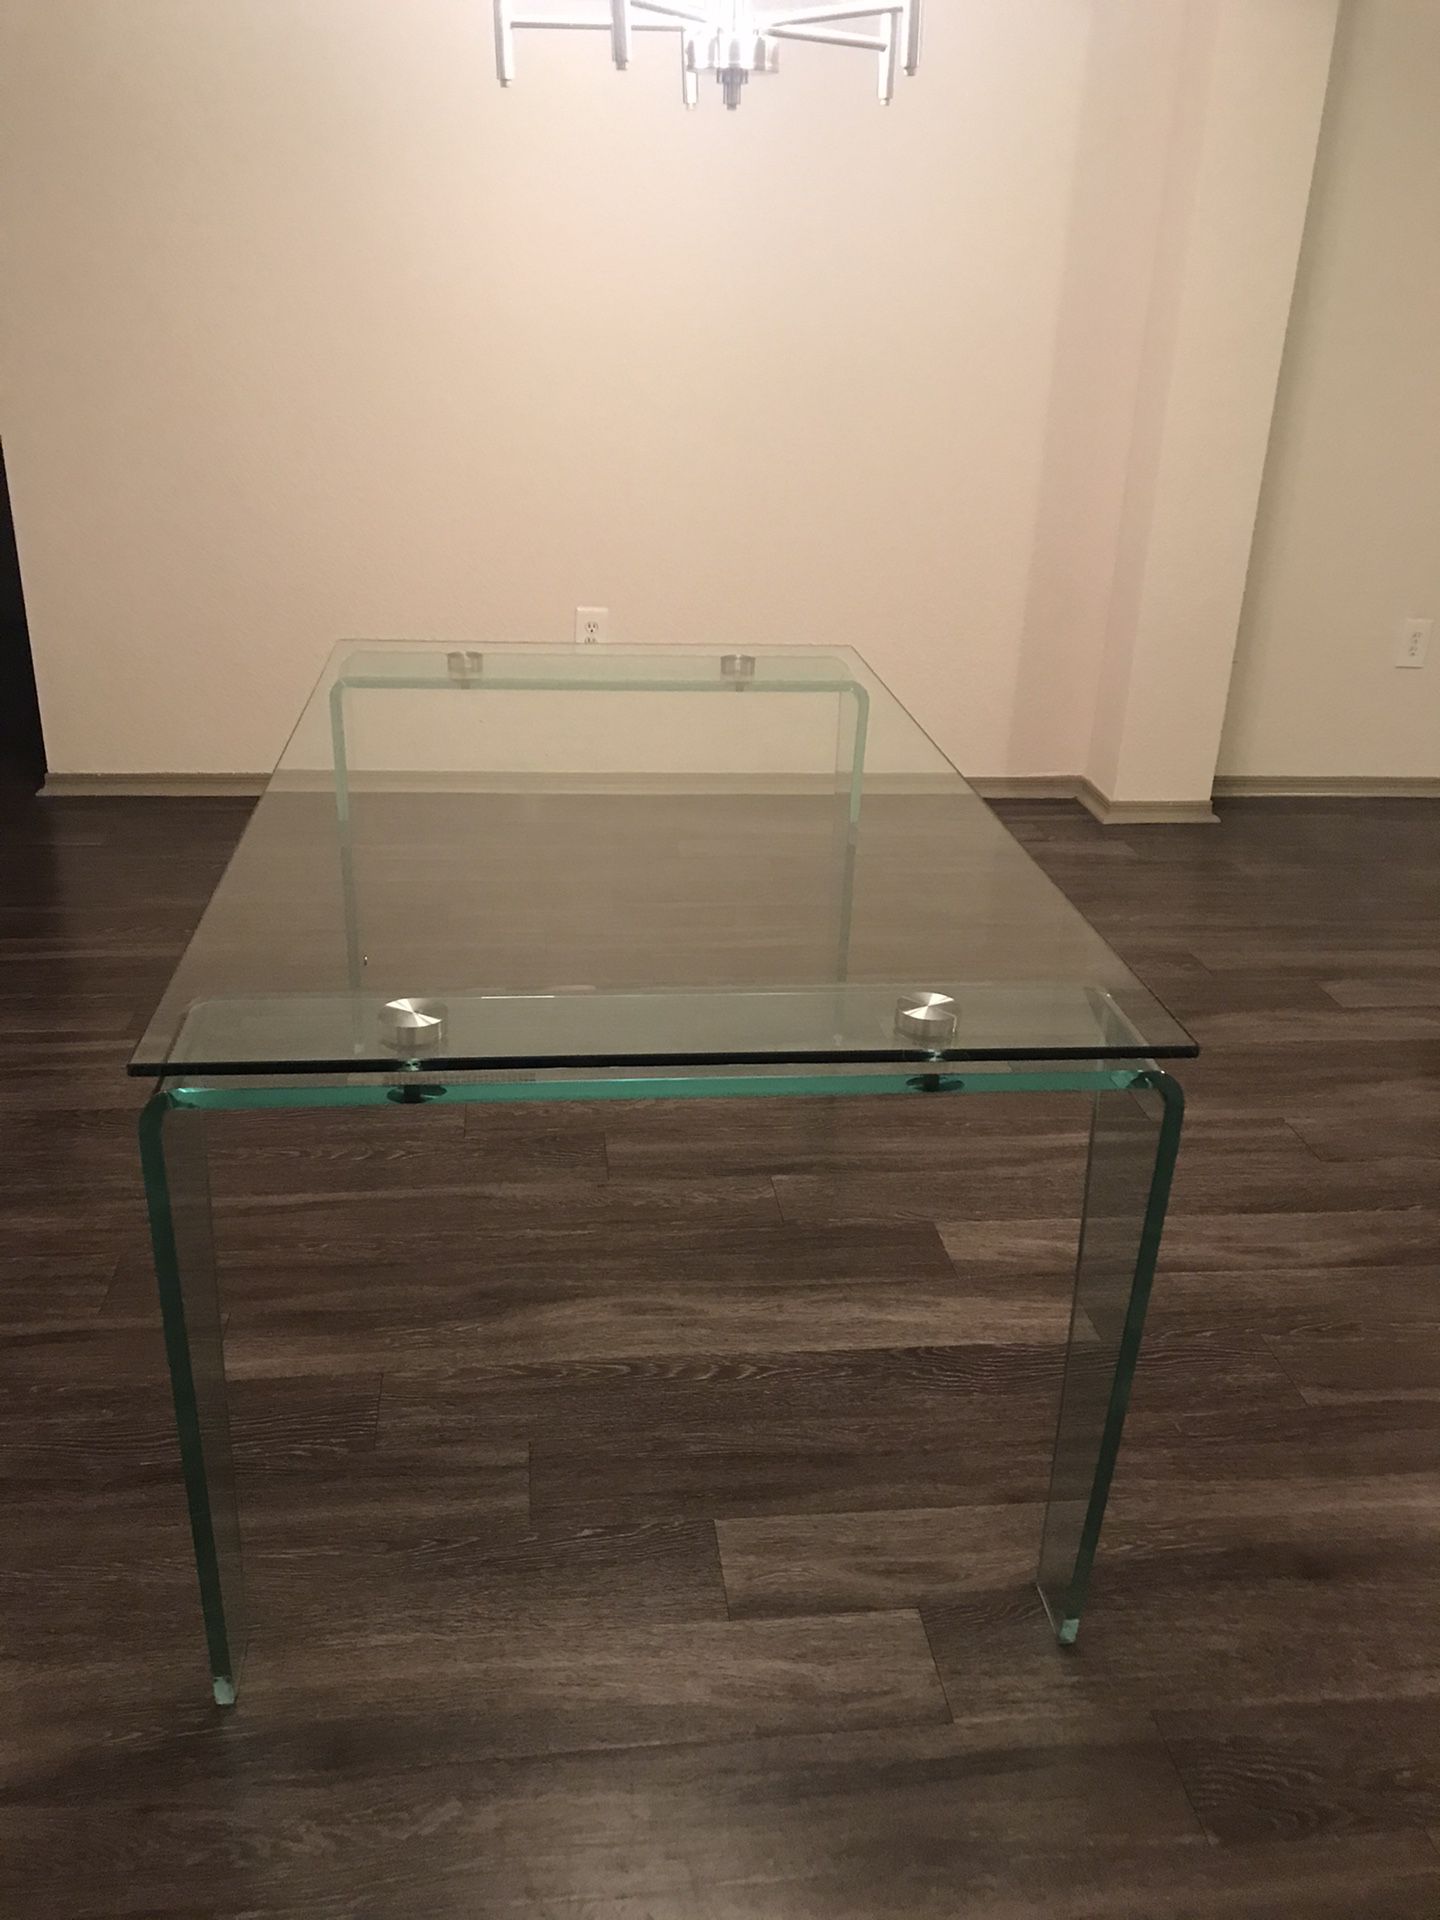 Glass Dining Table in Coral Springs!